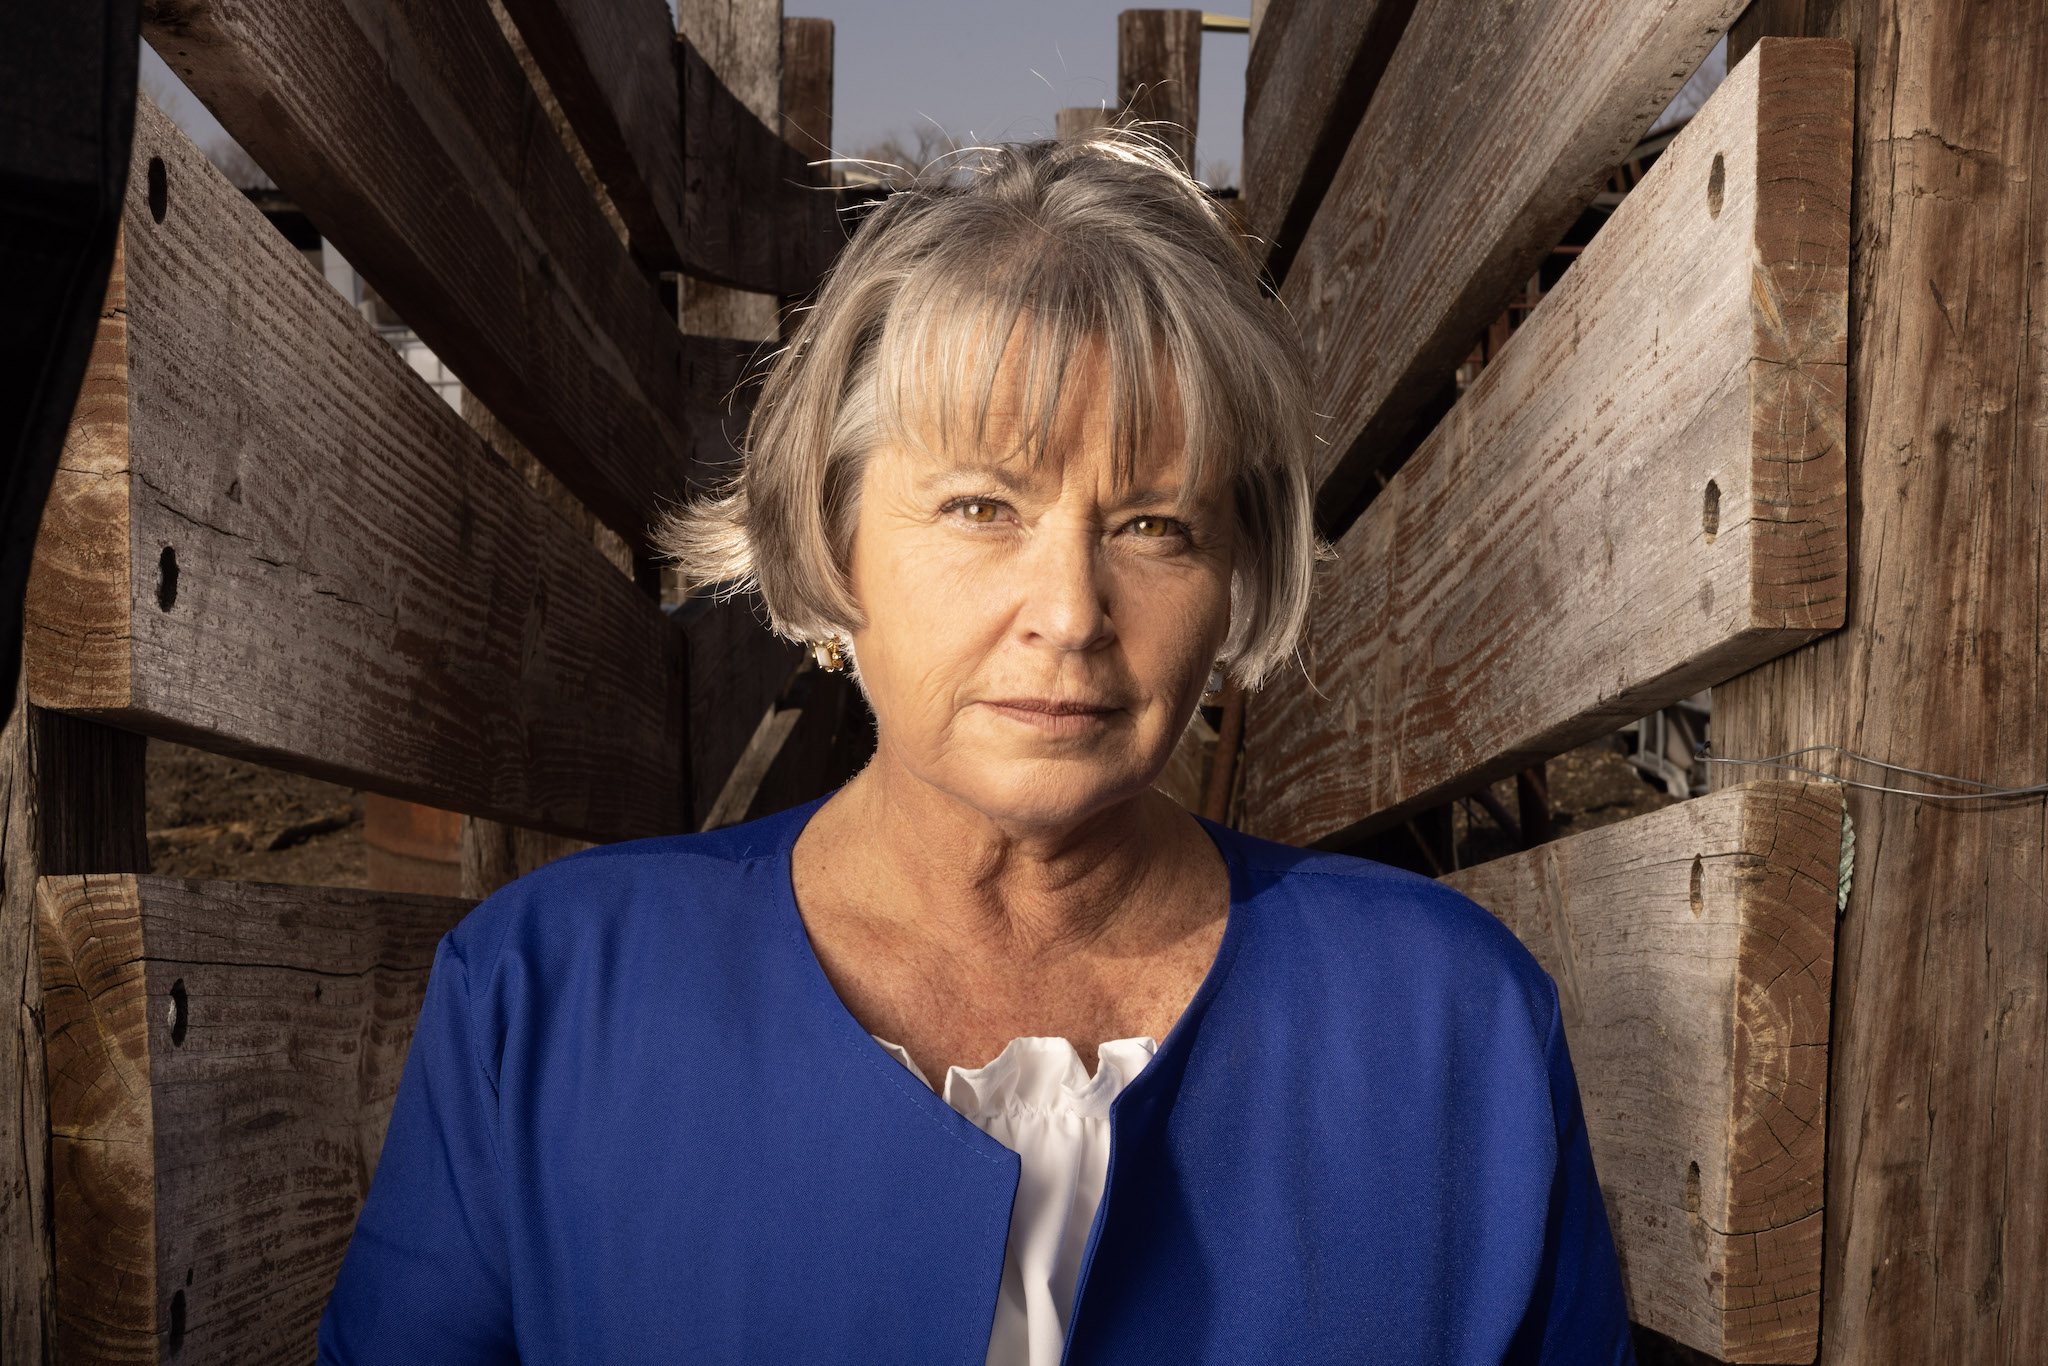 Mary Kelleher is a gray-haired white woman, wearing a blue jacket over a white blouse. She is photographed outdoors in a barn.